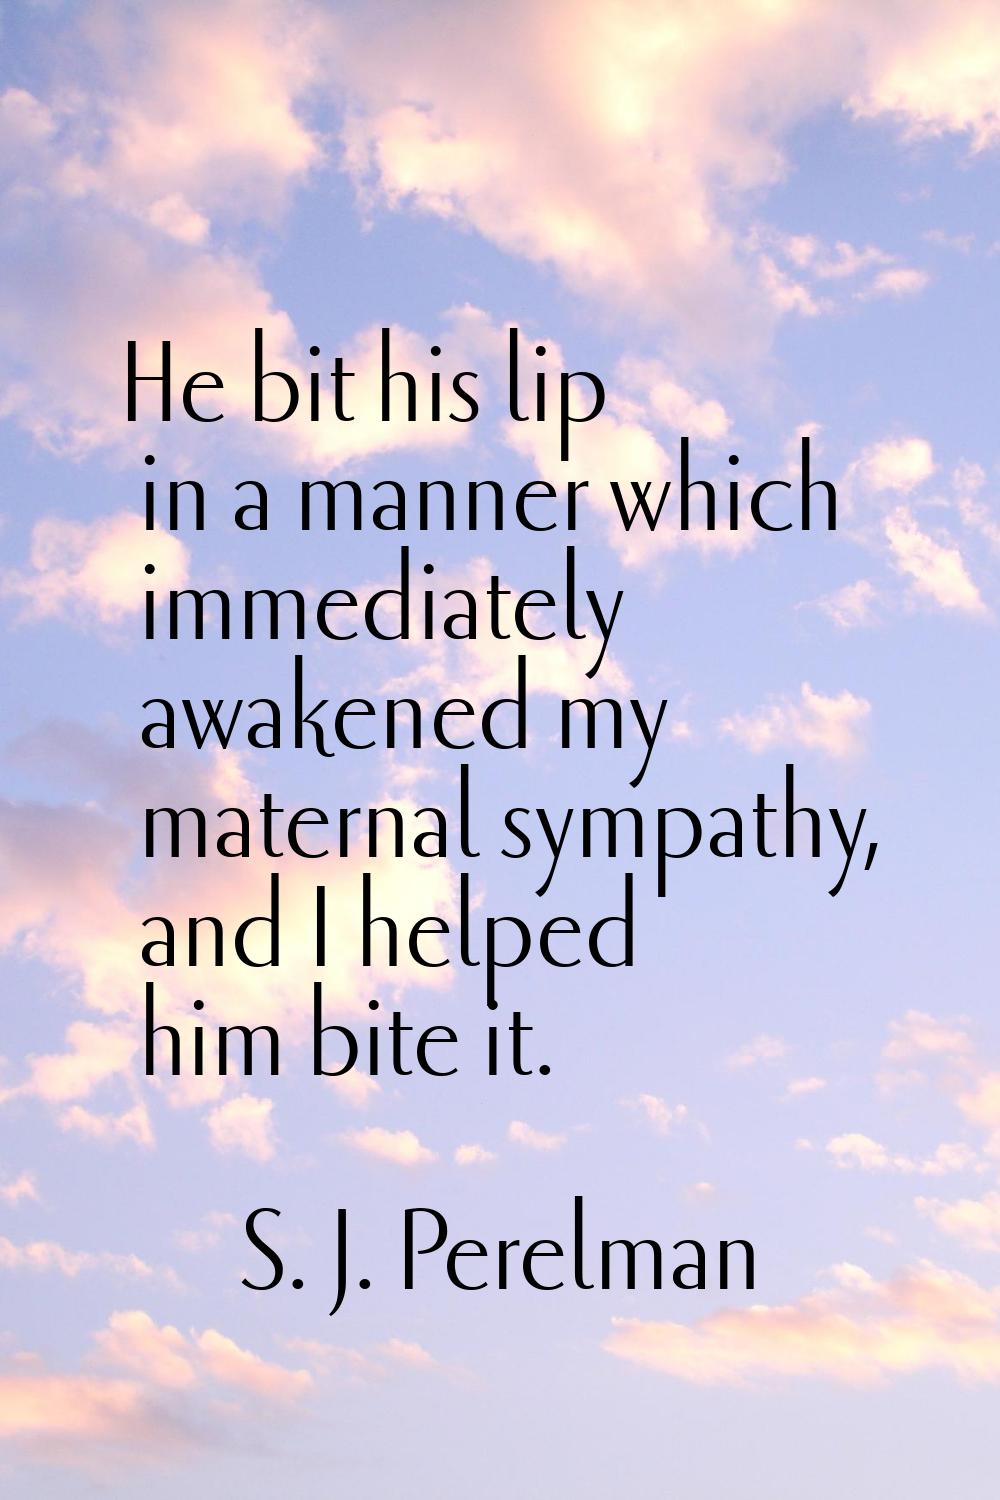 He bit his lip in a manner which immediately awakened my maternal sympathy, and I helped him bite i